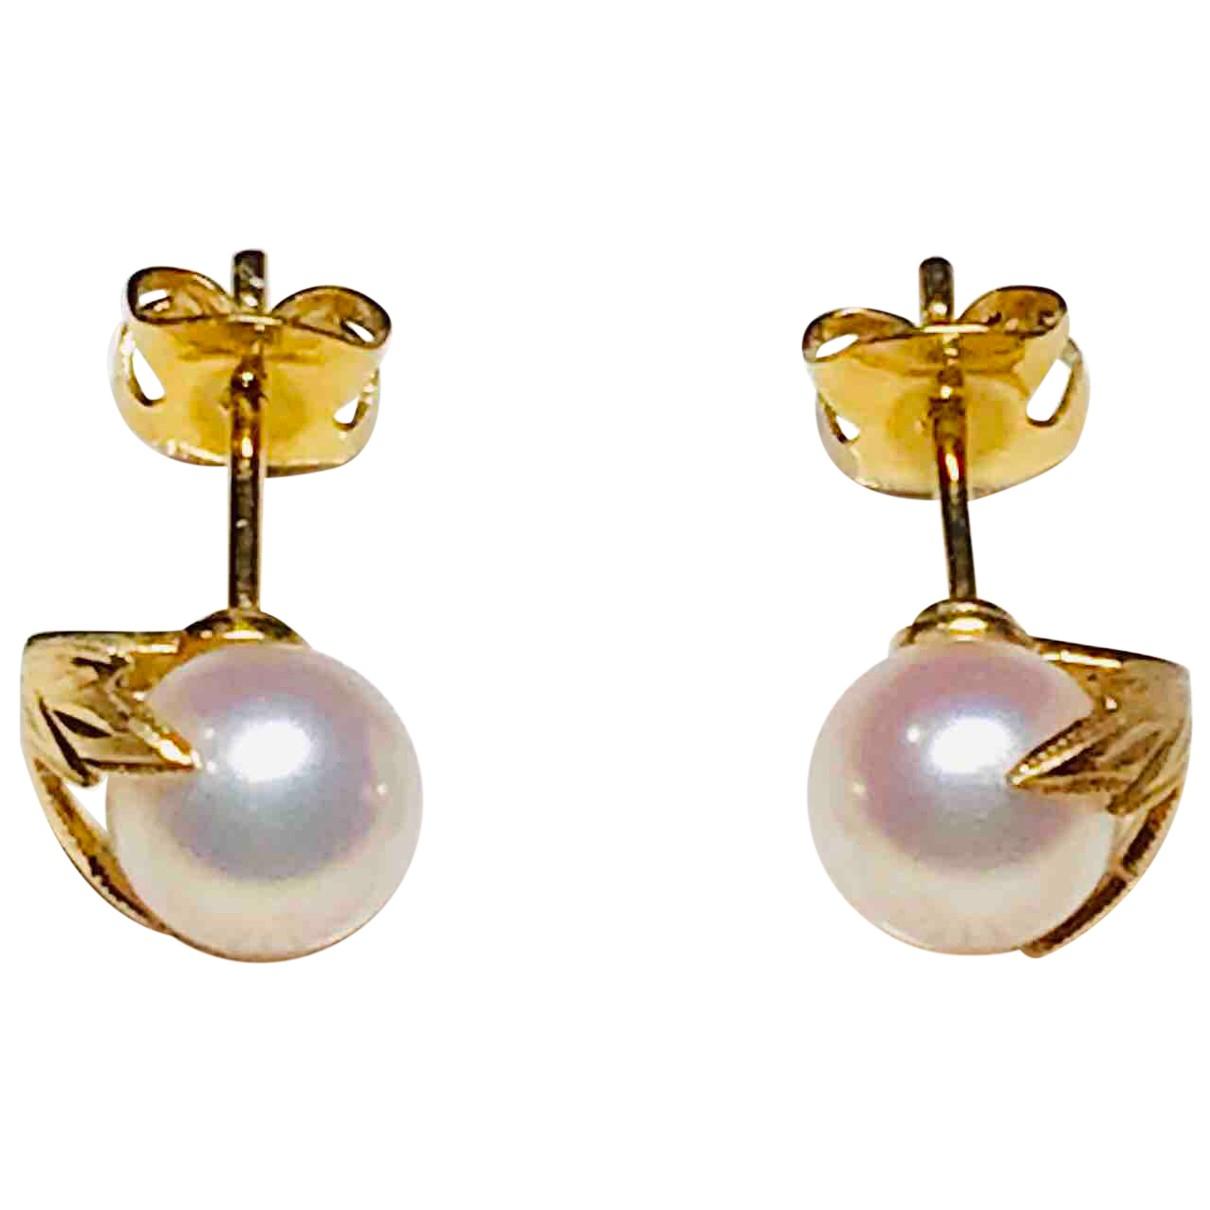 Mikimoto Pearls earrings for sale